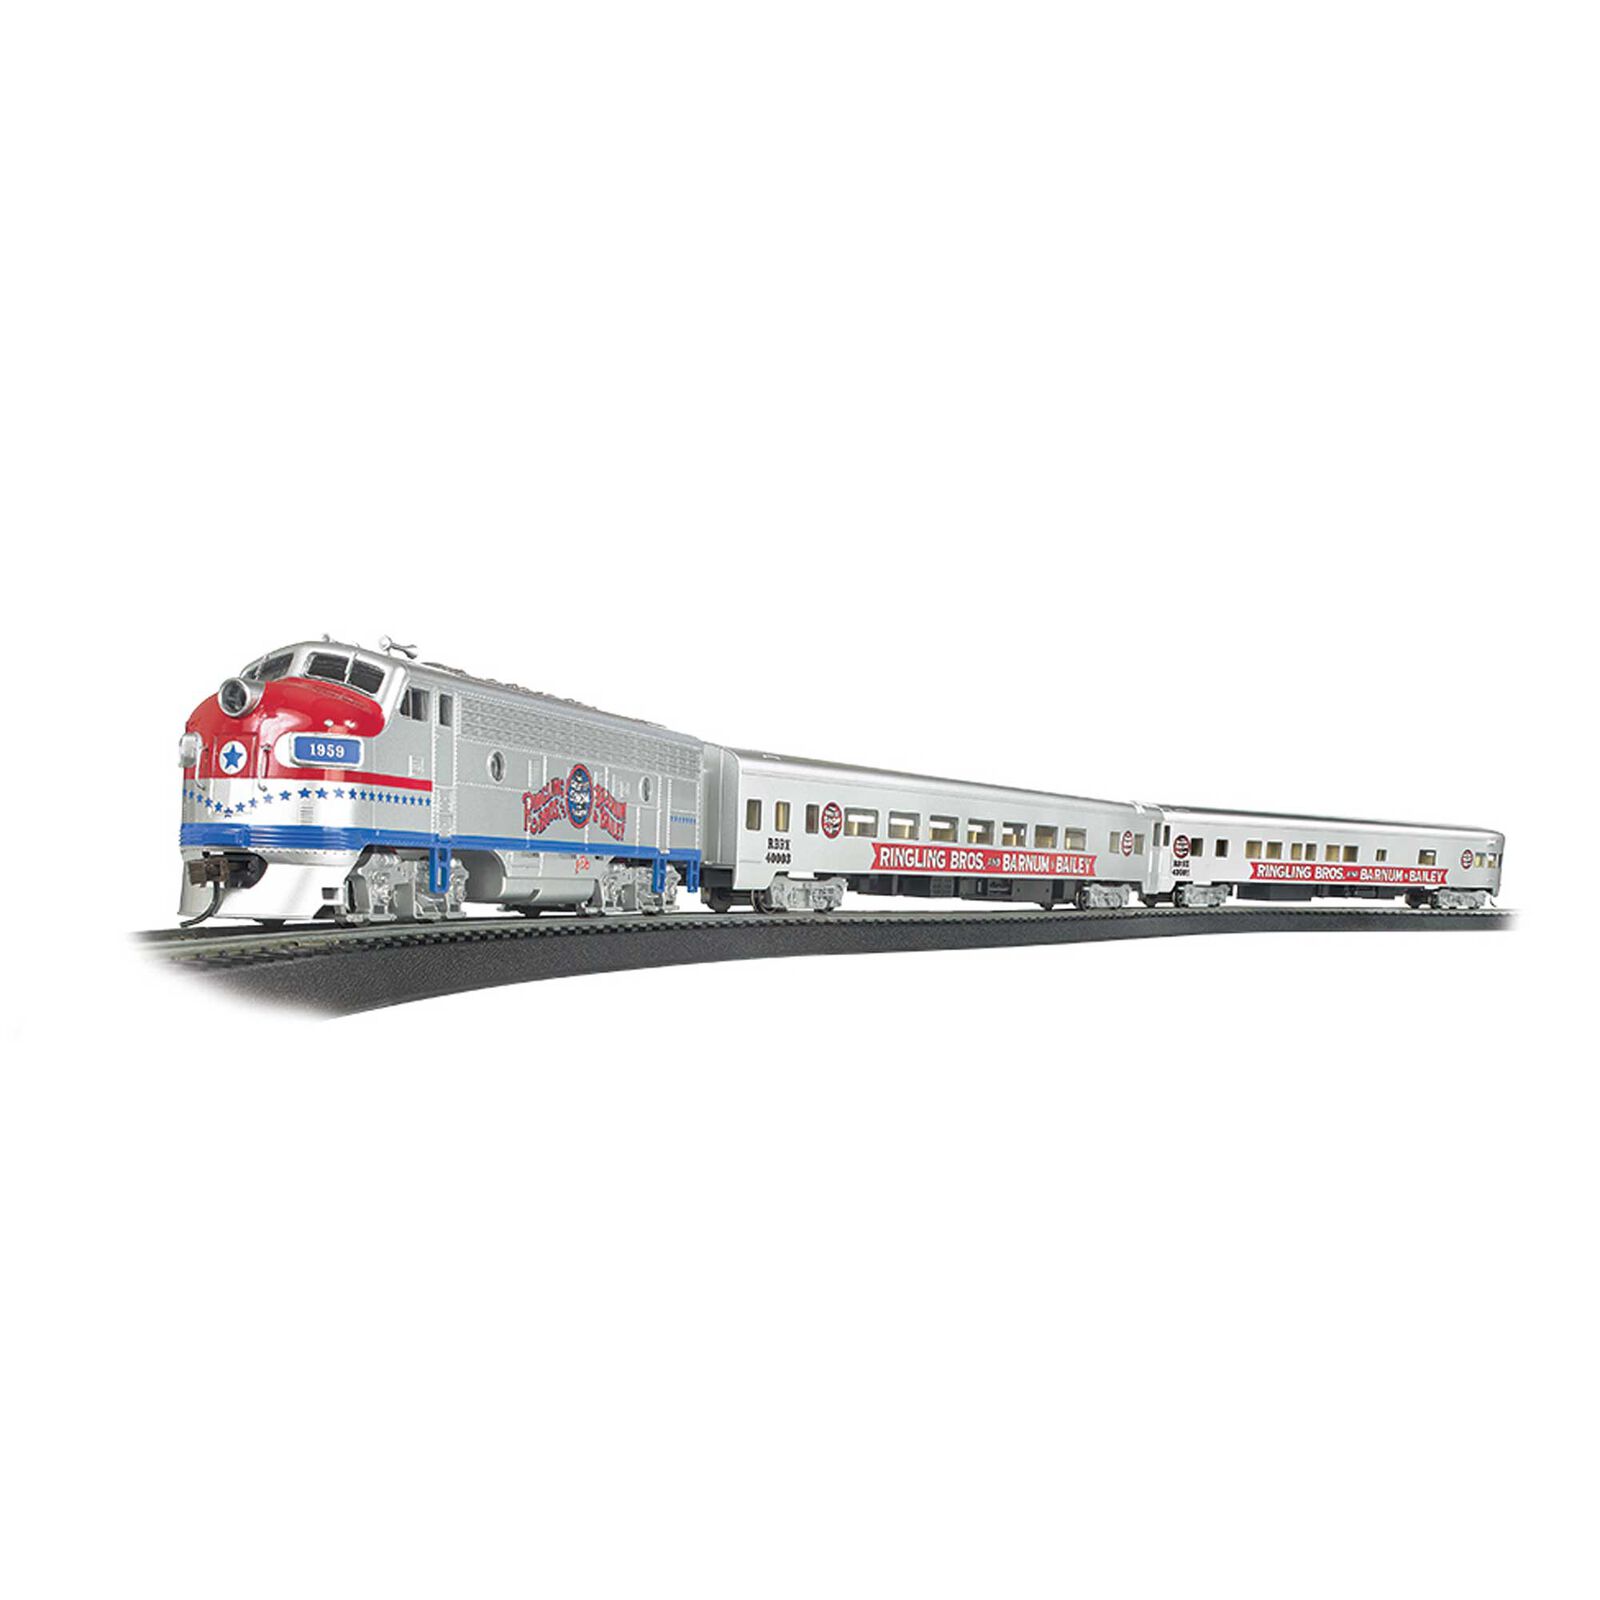 HO The Greatest Show on Earth Special Train Set